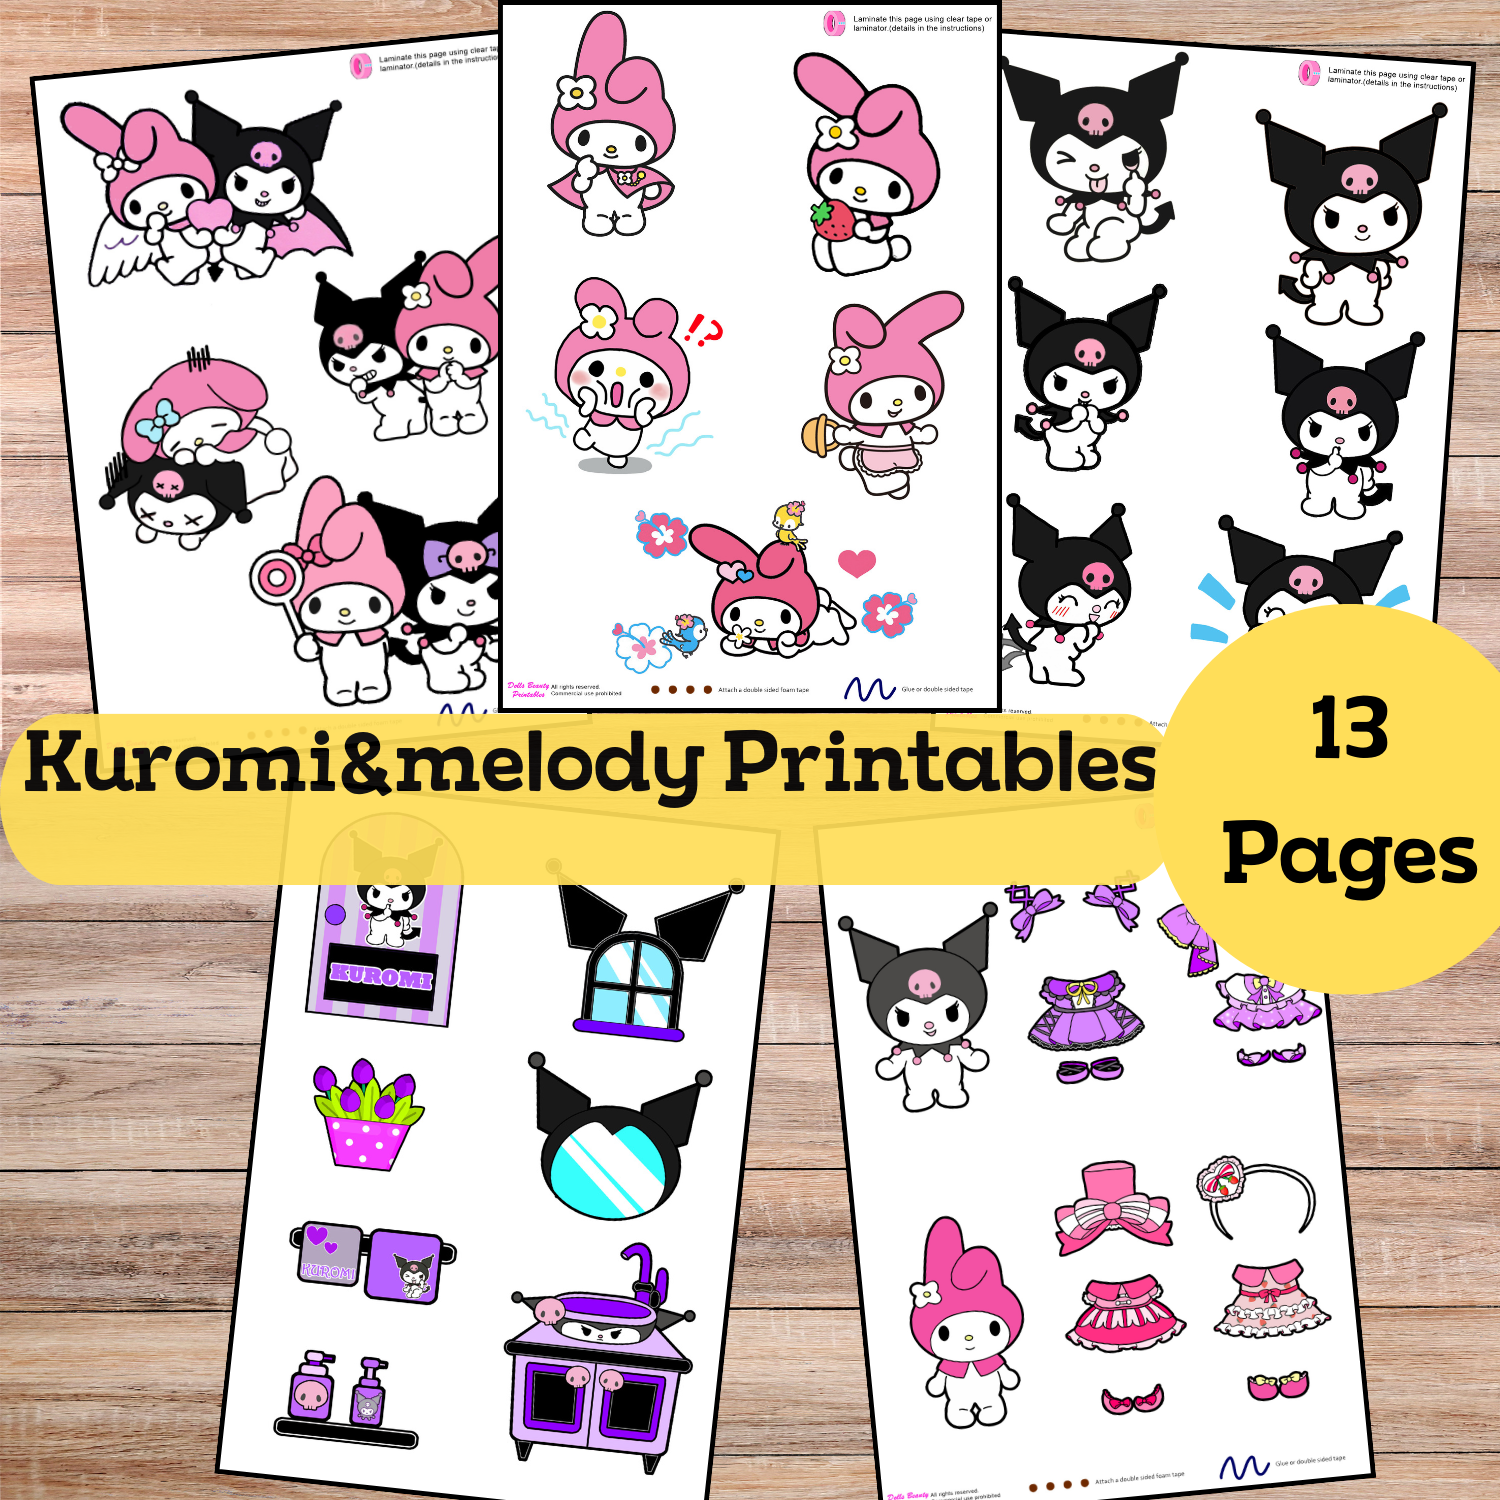 My Melody and Kuromi Decal 1 – HomeyHome Decor